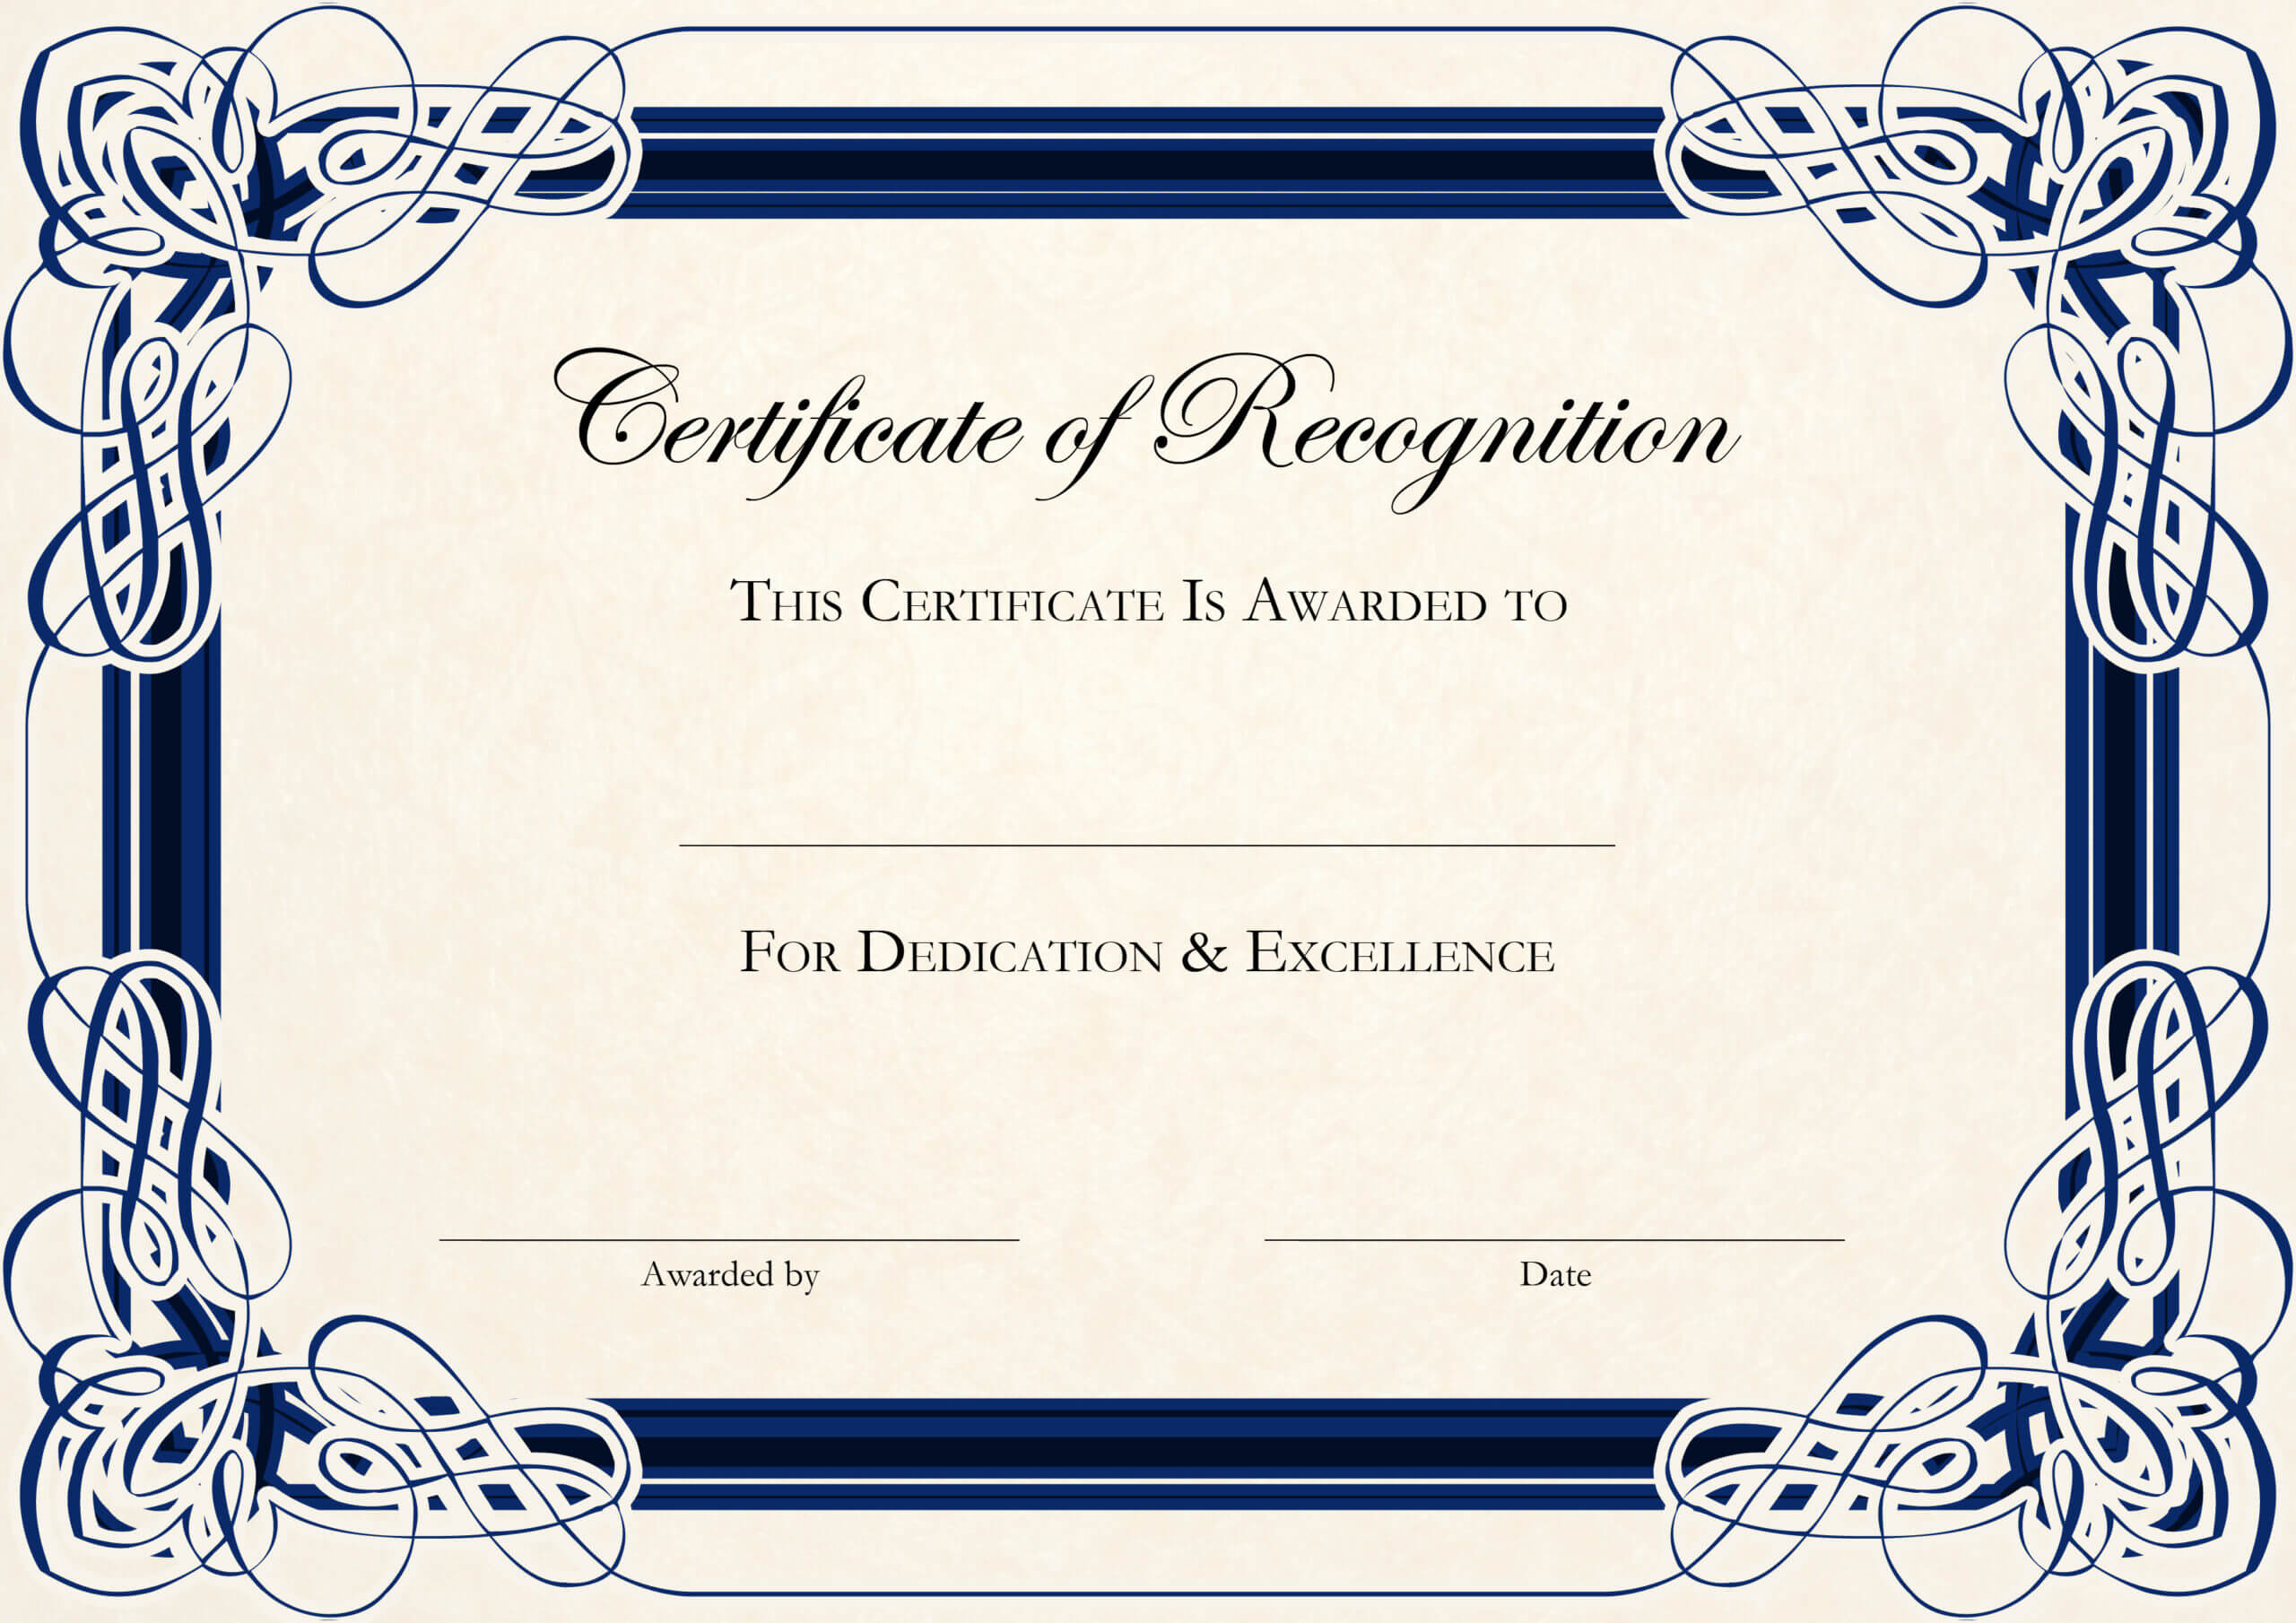 A4 Paper Formal Certificate Of Recognition Template Design With Employee Recognition Certificates Templates Free